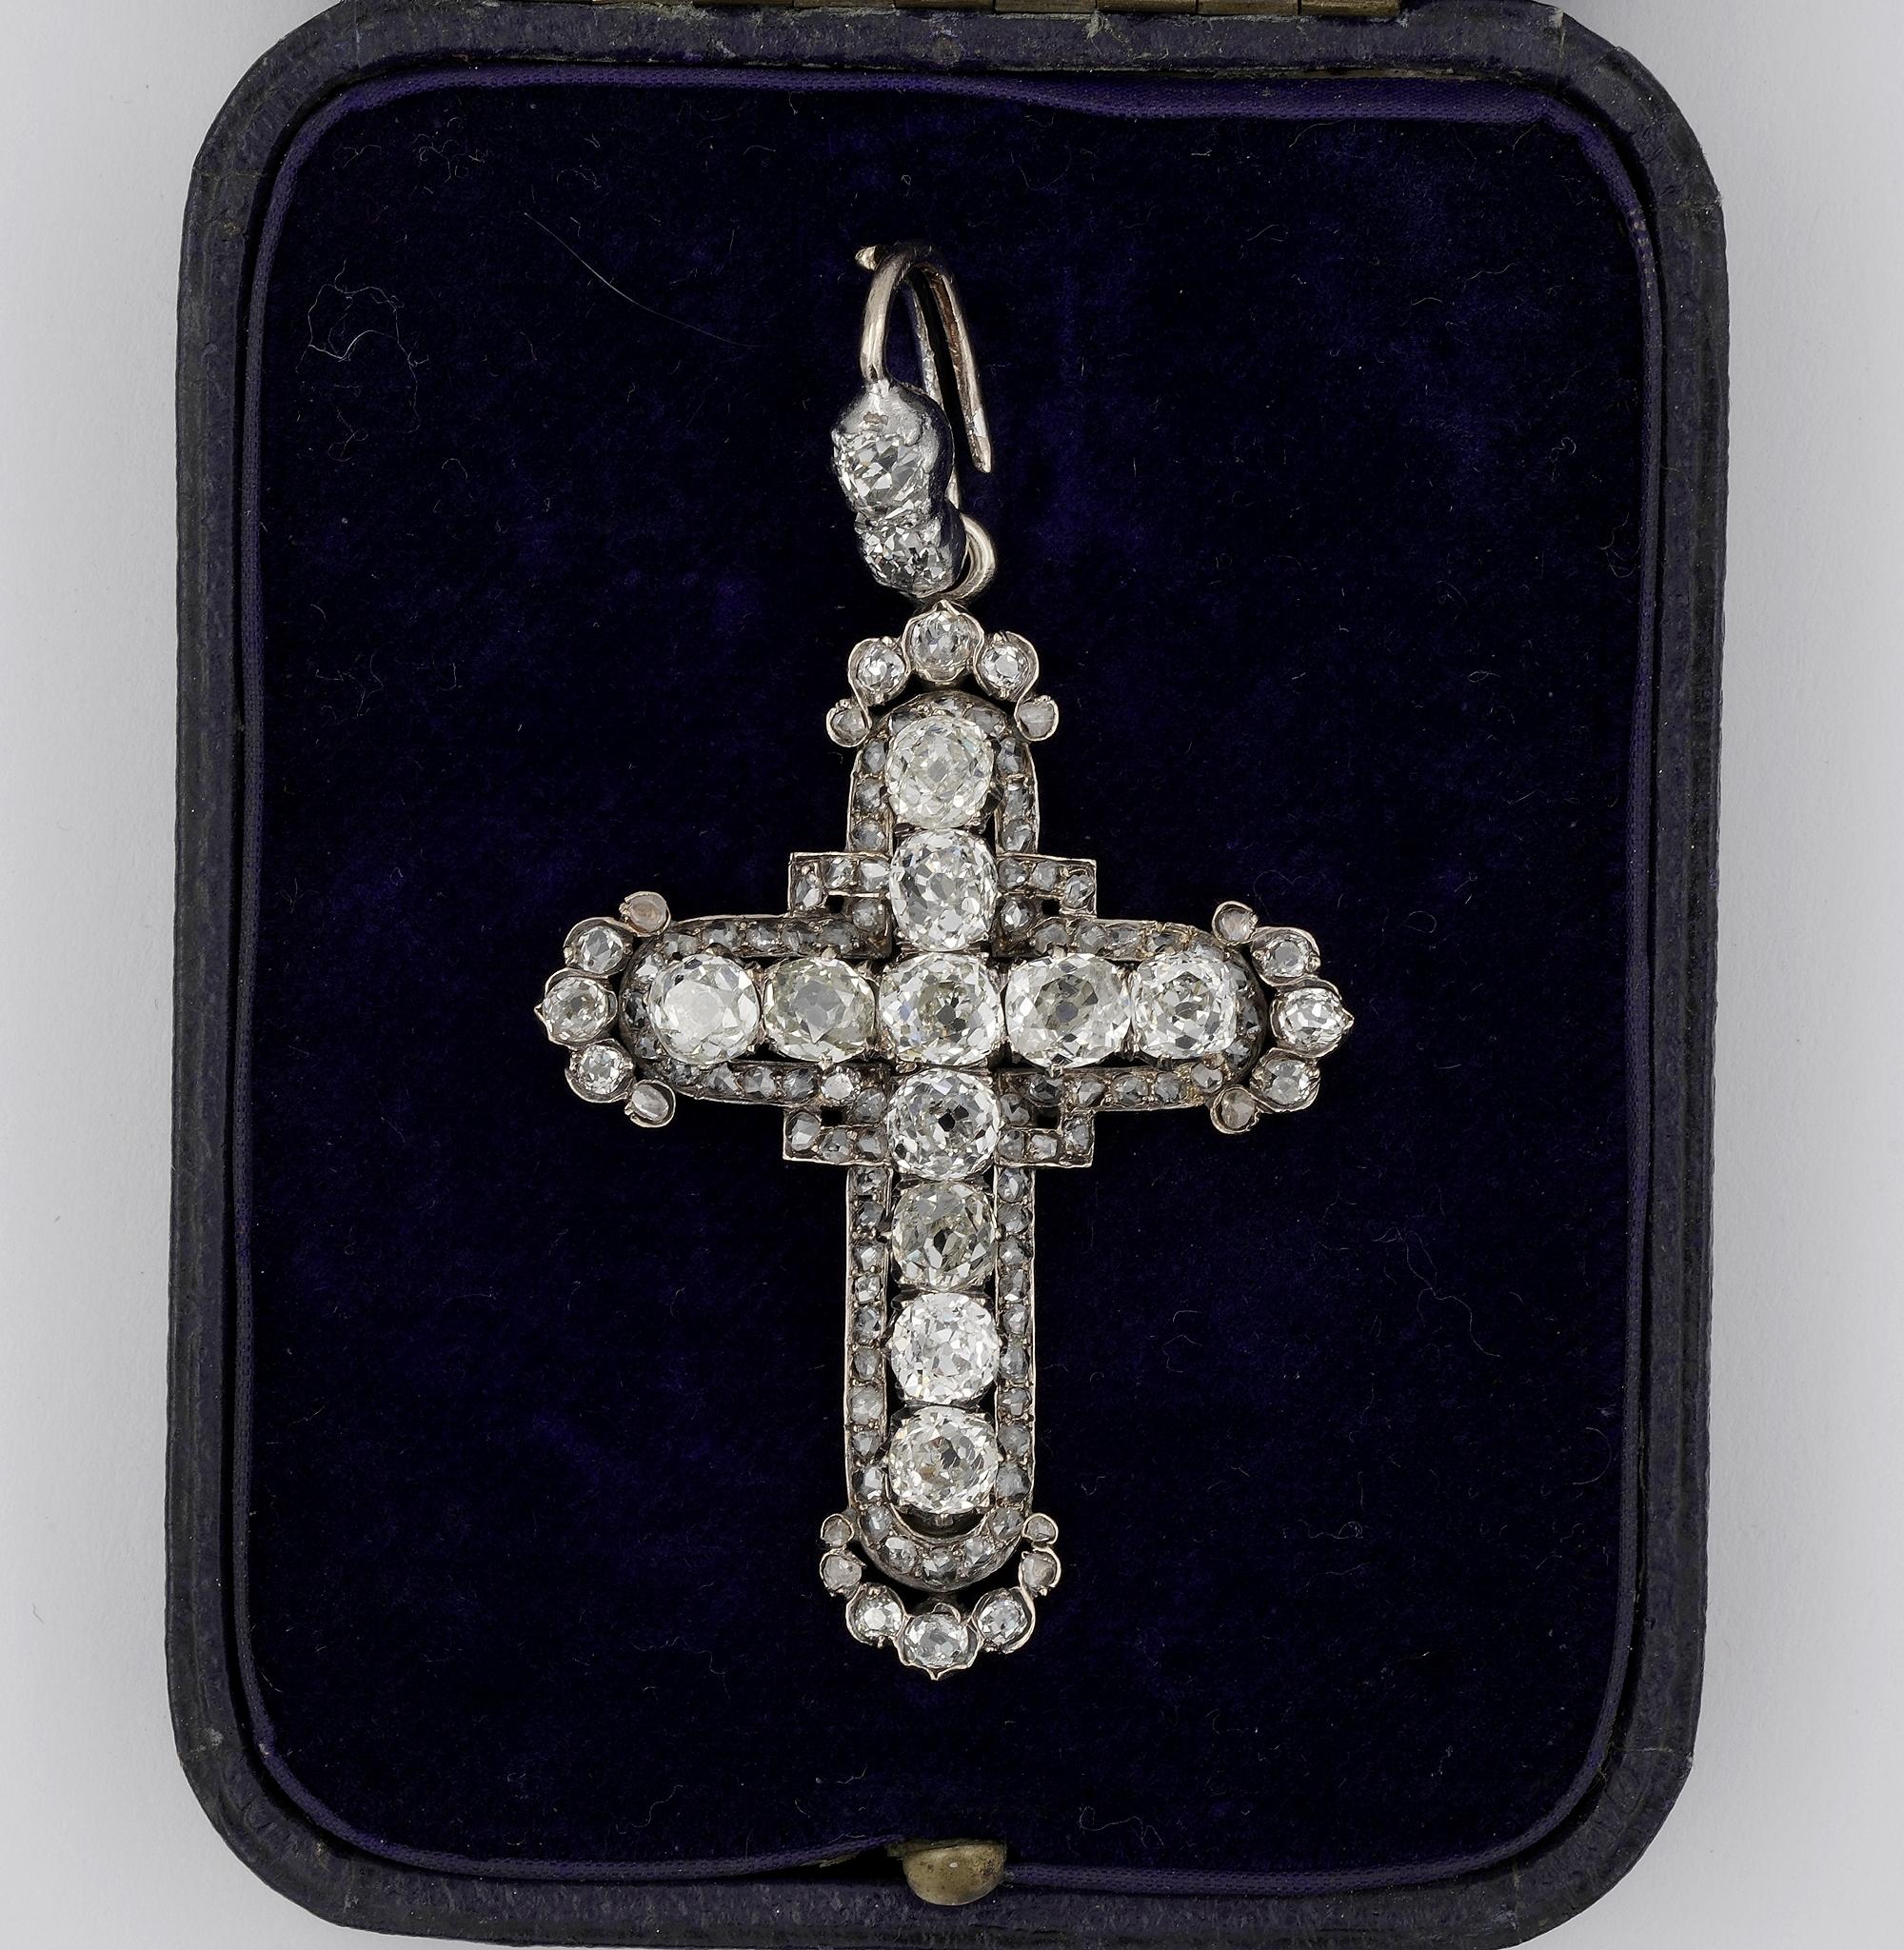 Rare & Beautiful

An antique Victorian period, French origin, Diamond cross, hand crafted of solid 18 KT gold with silver top – bearing French marks eagle’s head assay mark for the period 1838-1847 and maker plus serial/inventory 13 12
Beautiful